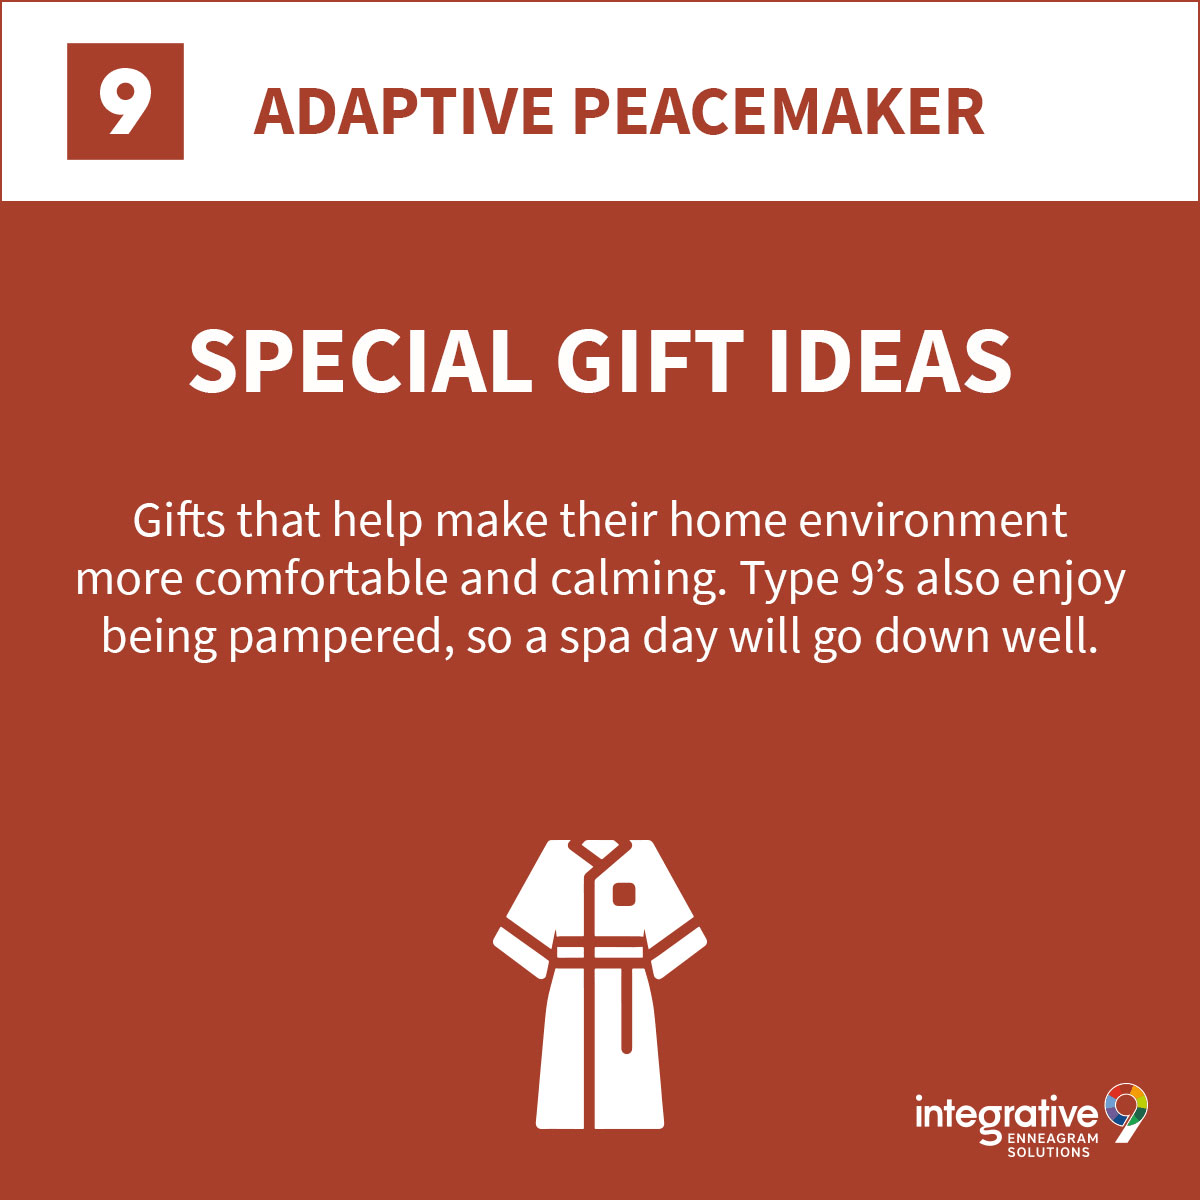 adaptive peacemaker special gift